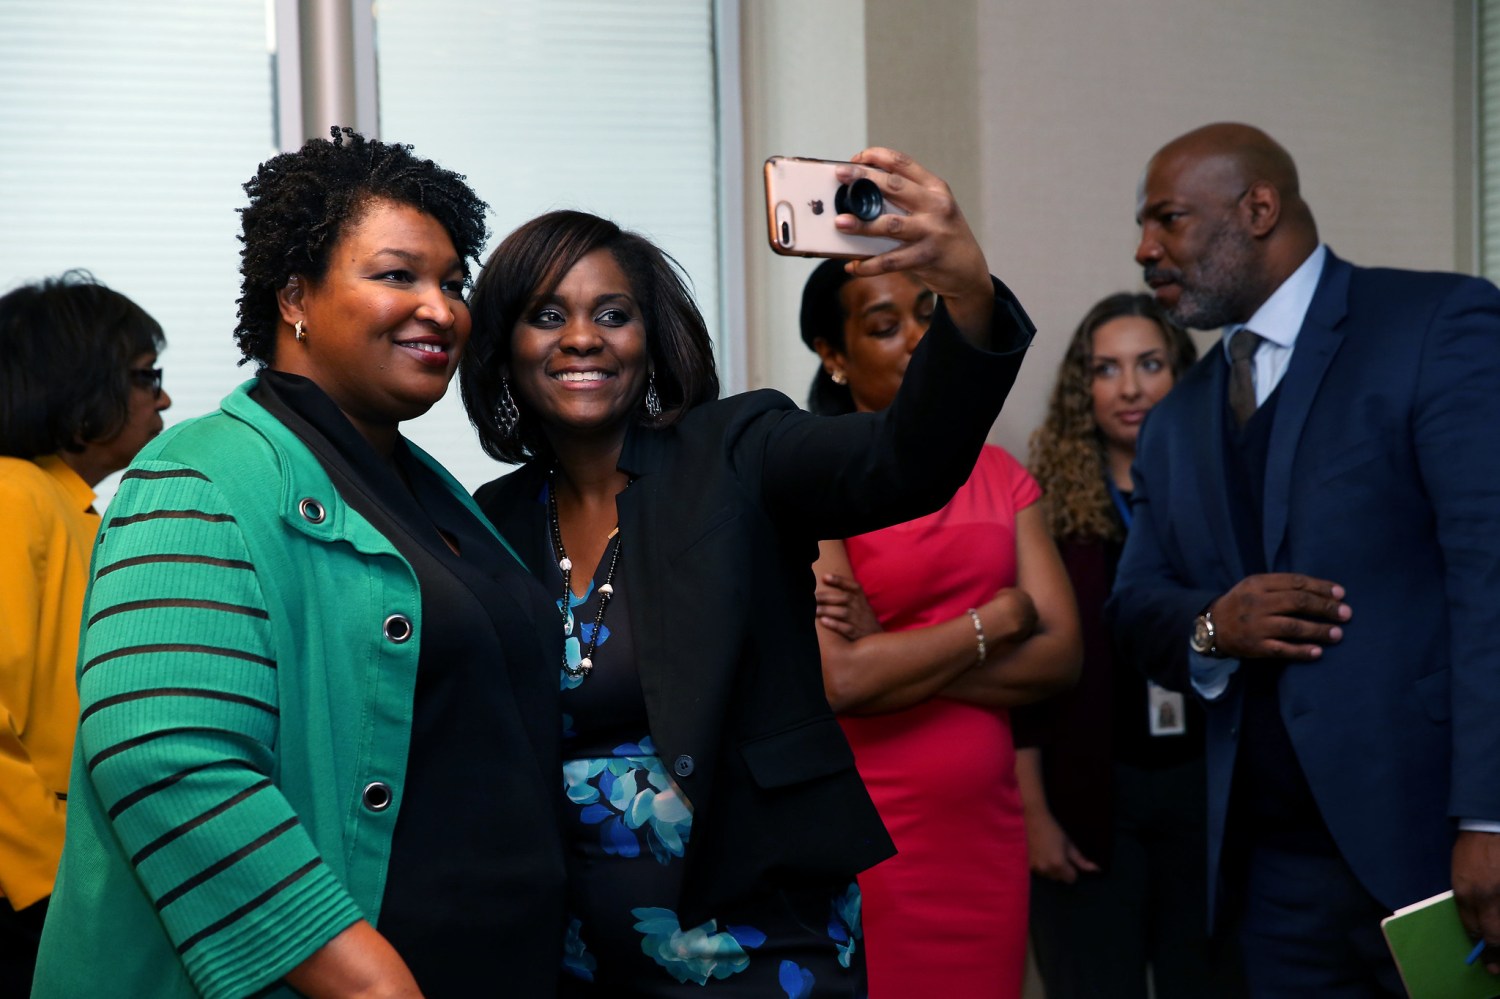 Brookings hosts political leader Stacey Abrams in a conversation about race and political power in the United States with Jelani Cobb, Columbia University's Lipman professor of journalism Friday, Feb. 15, 2019 in Washington.